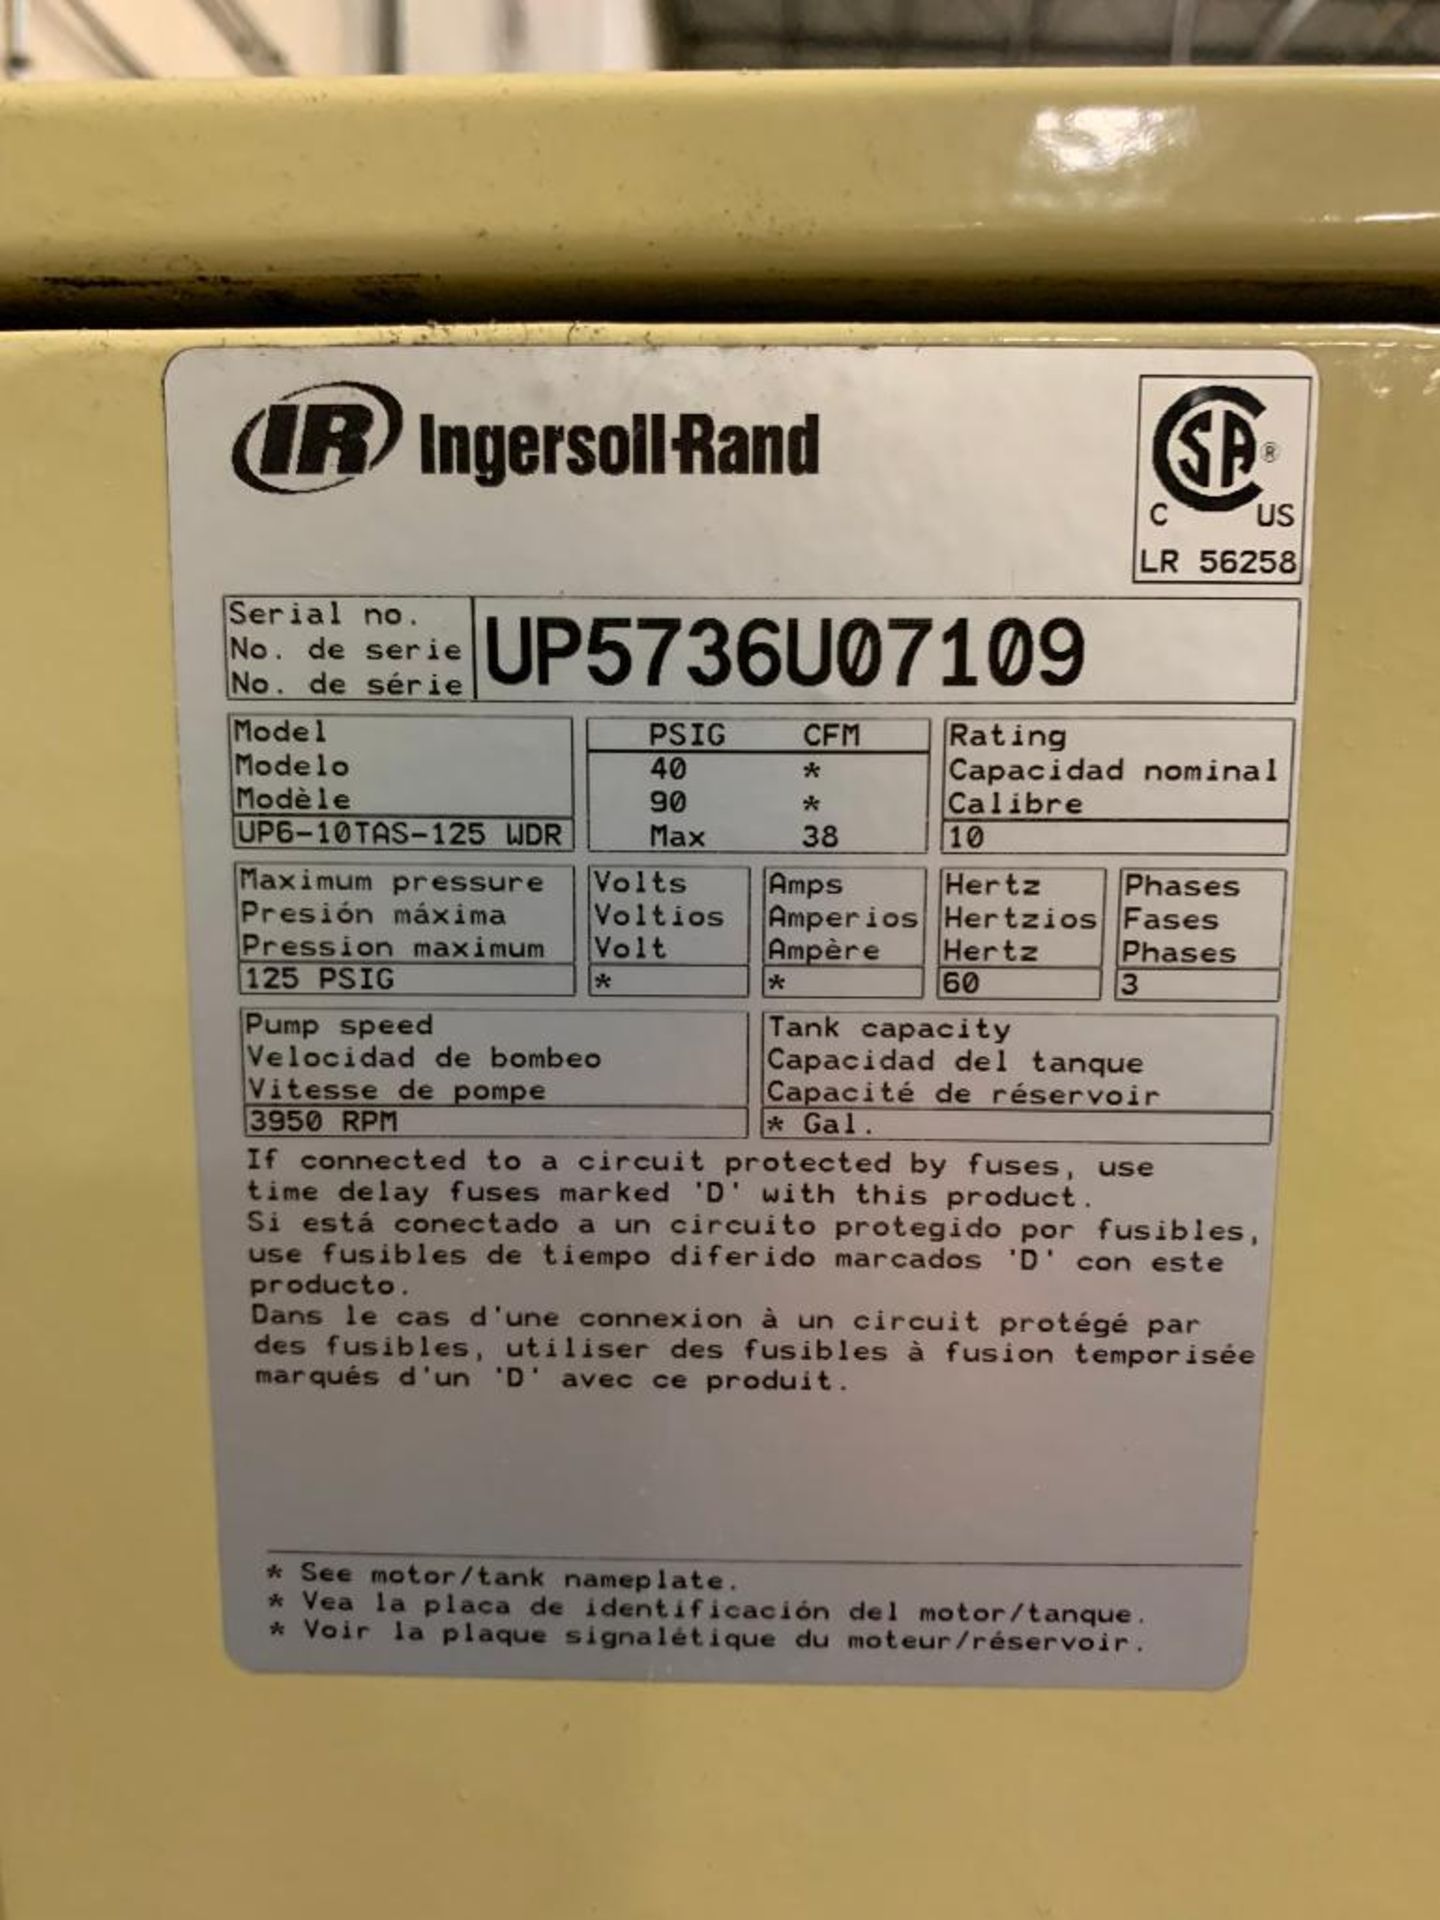 Ingersoll Rand 10 HP Air Compressor, Model UP6-10TAS-125 WDR, S/N UP5736UO7109, 125 PSIG - Image 4 of 4